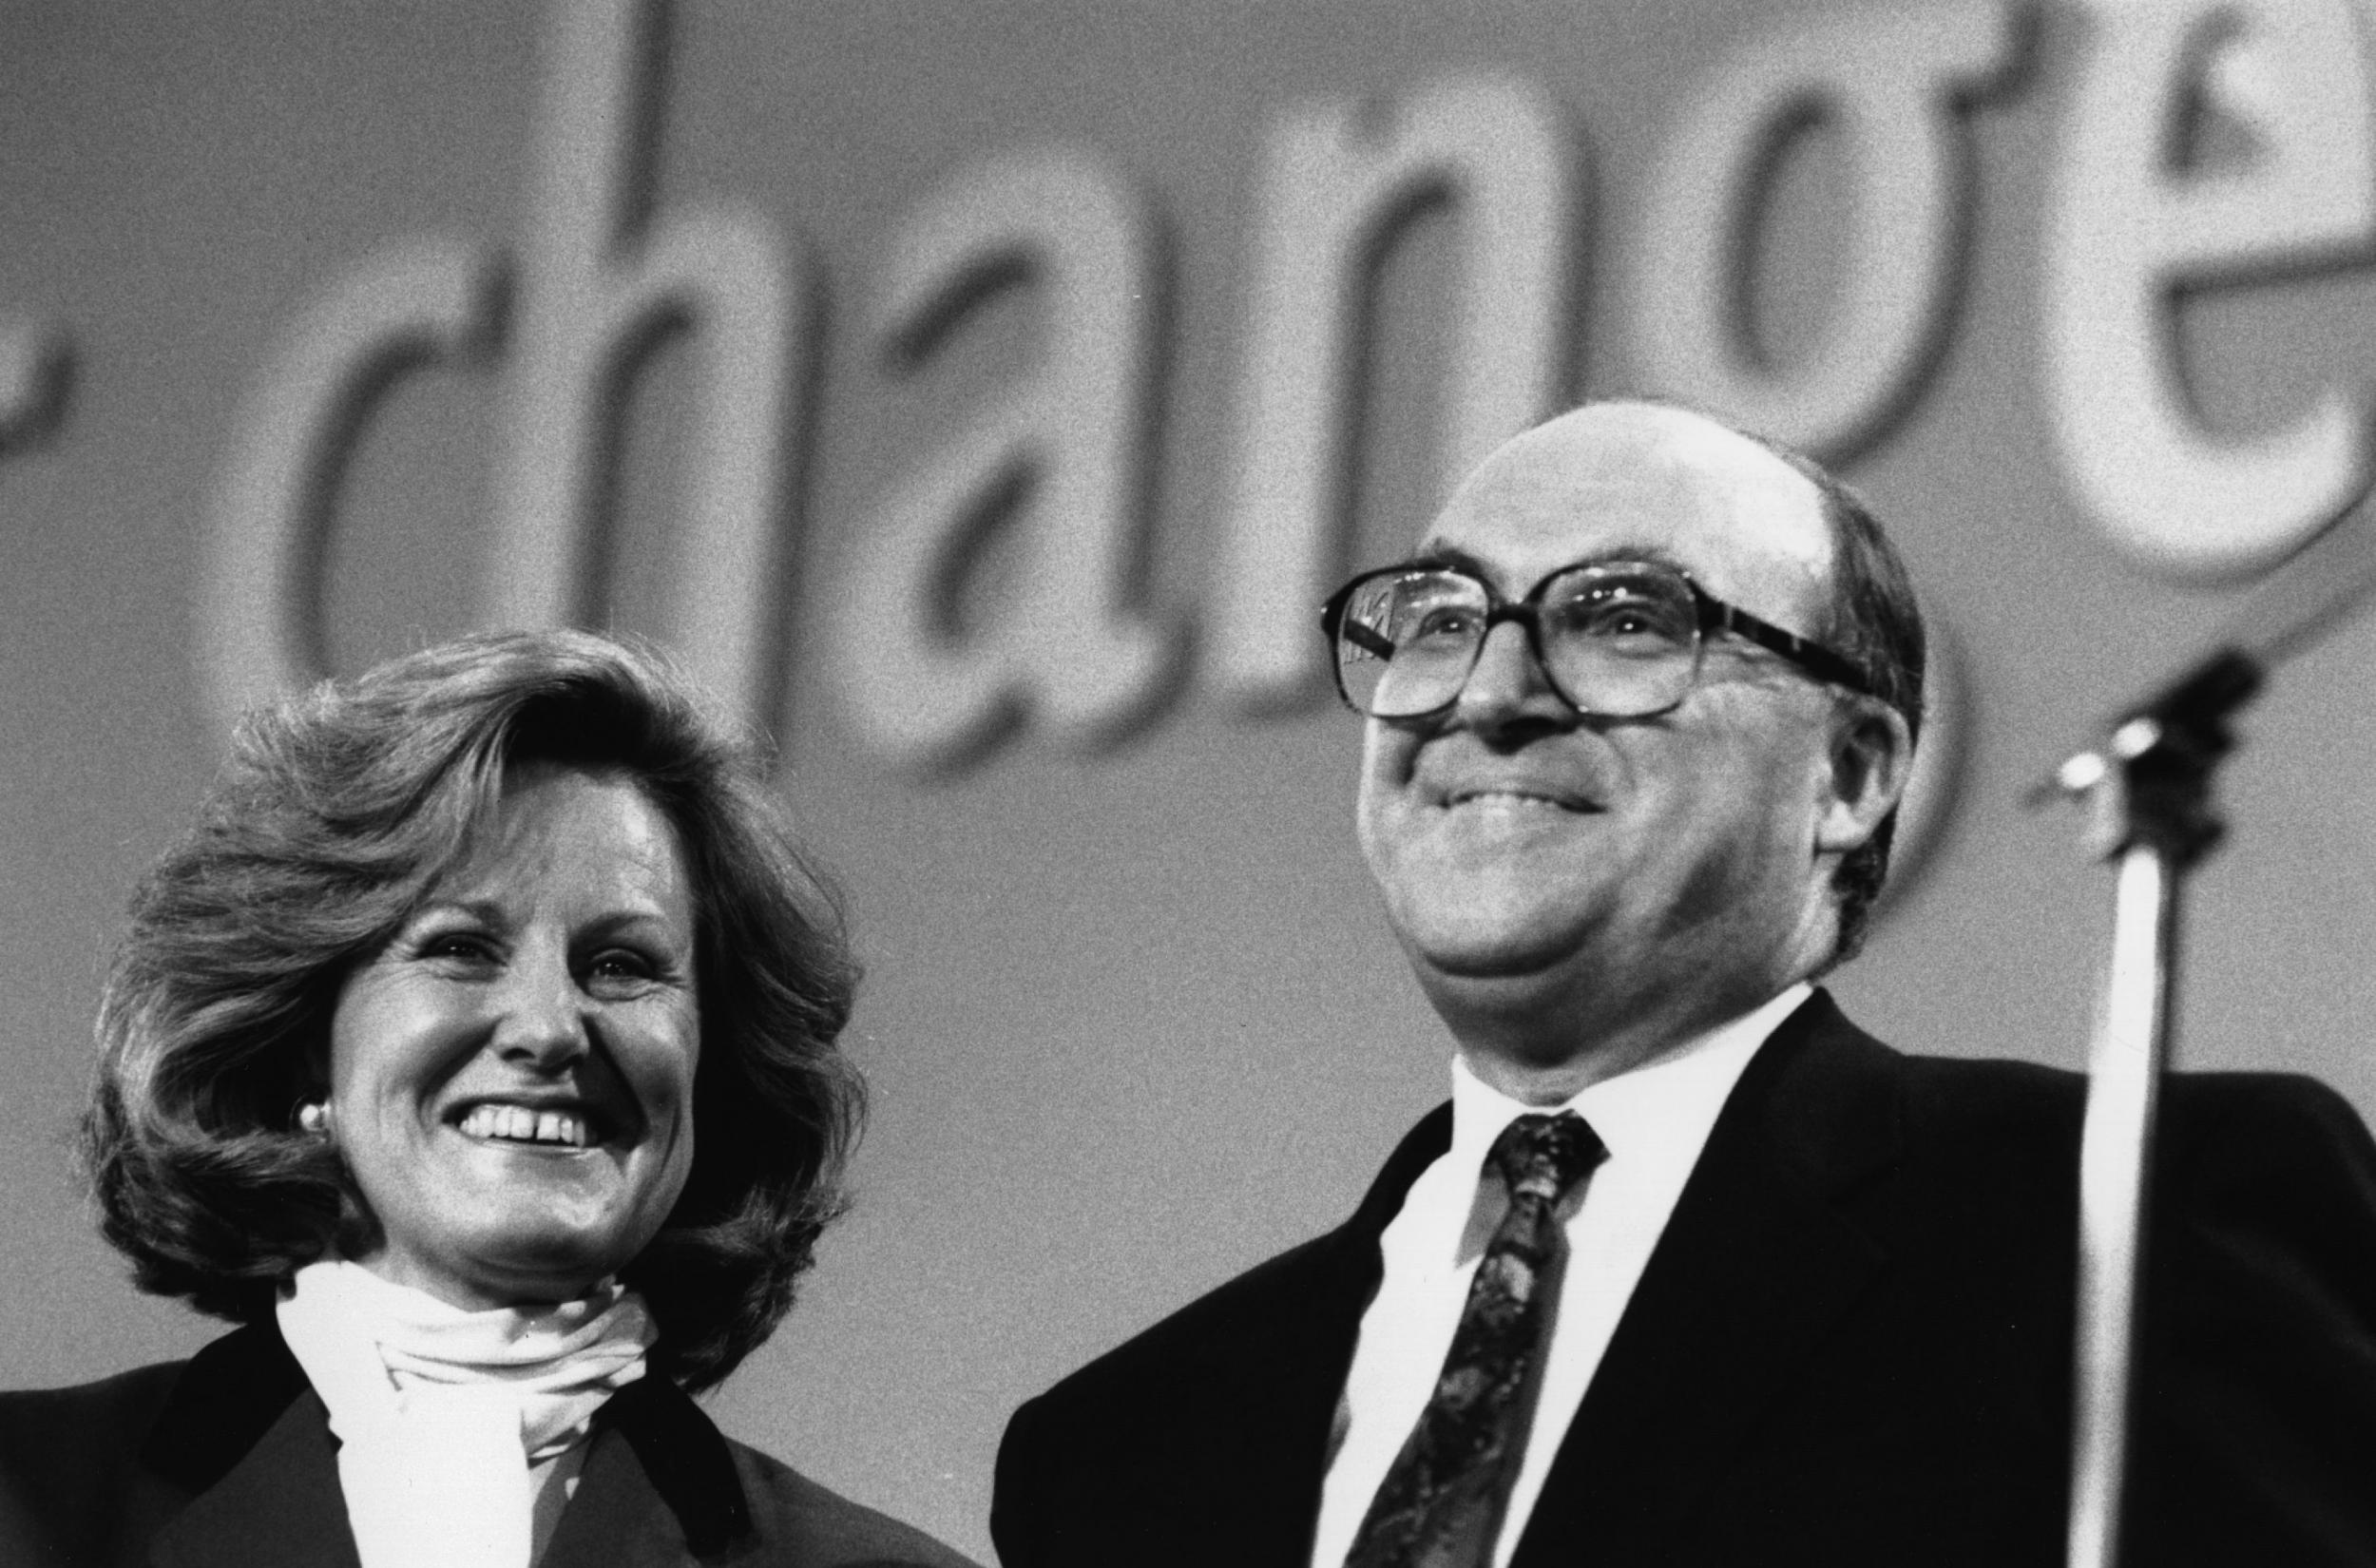 With his wife Elizabeth, Baroness Smith of Gilmore, who survives him, in 1992